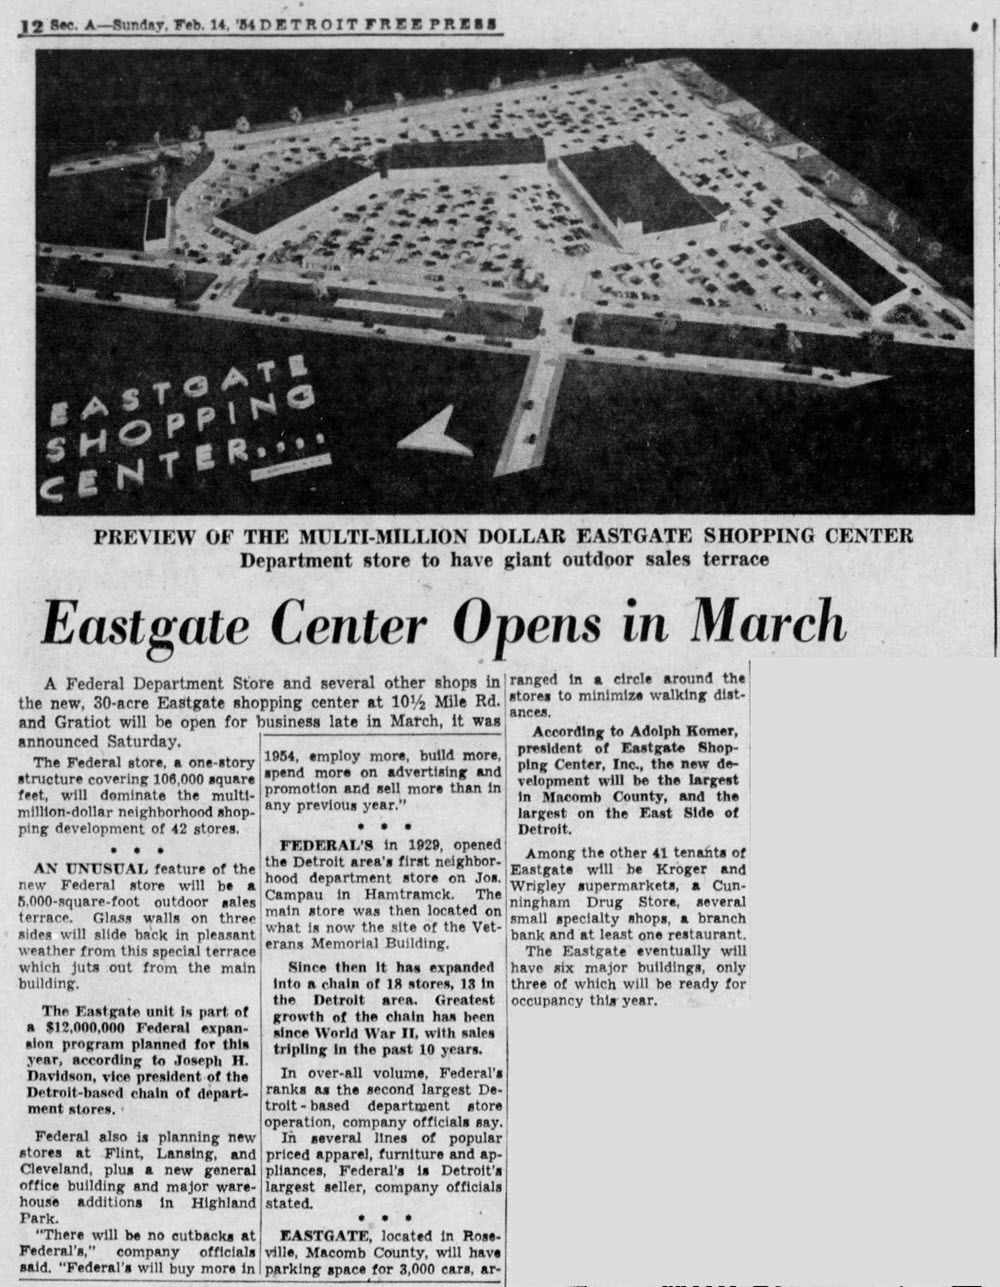 Eastgate Center - Feb 14 1954 Article (newer photo)